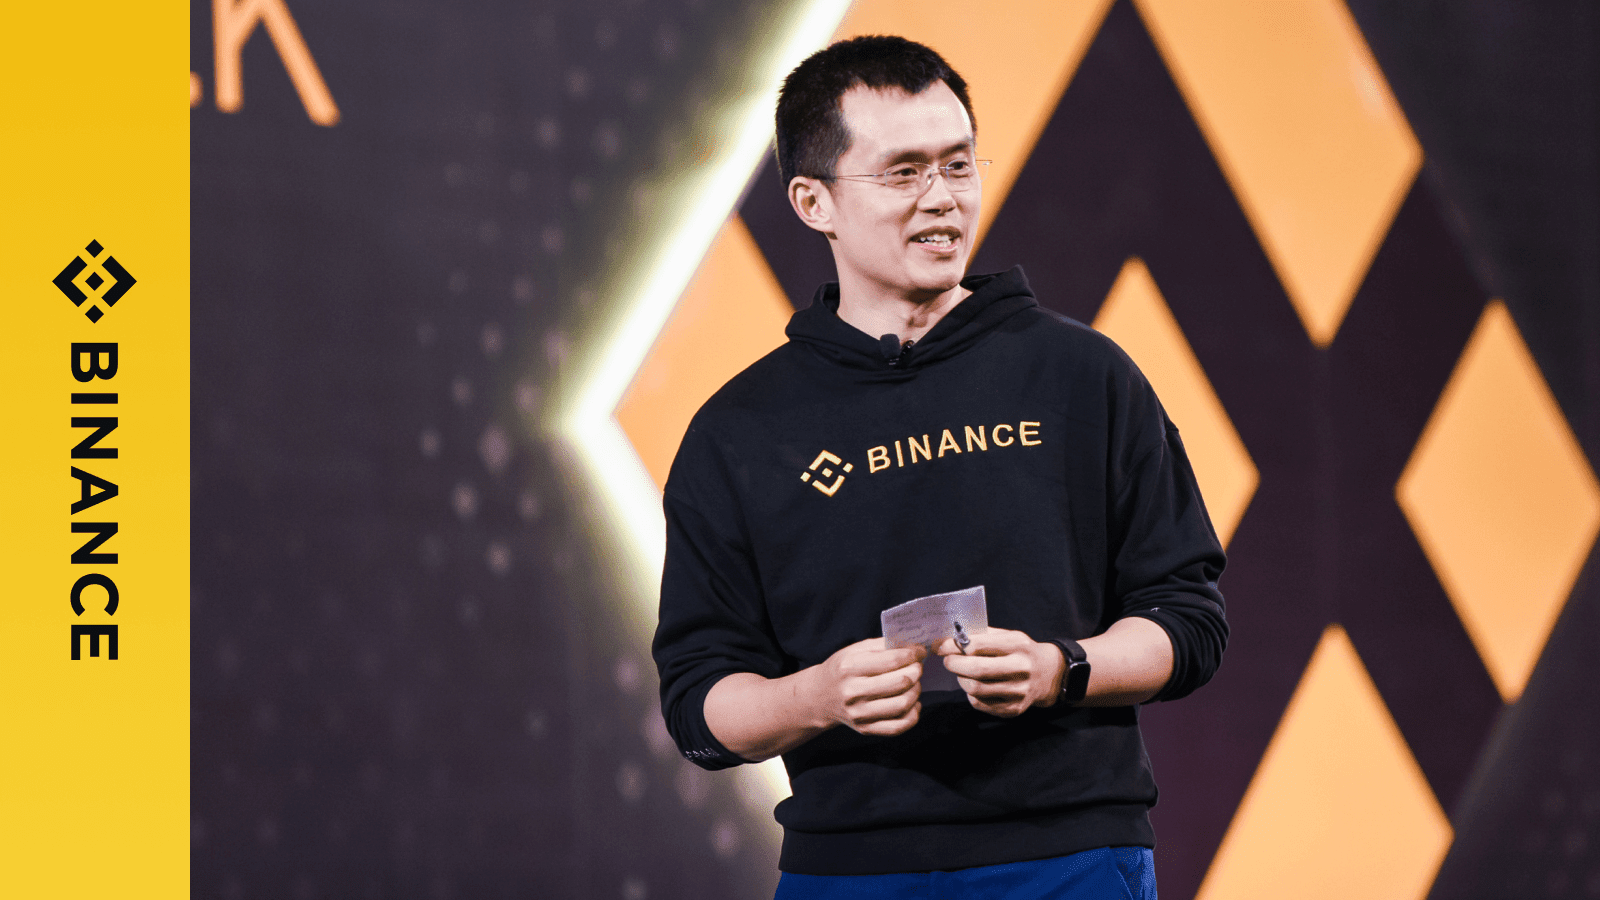 Golemglobe releases Binance Full Review | Strengths, Weaknesses And Alternatives